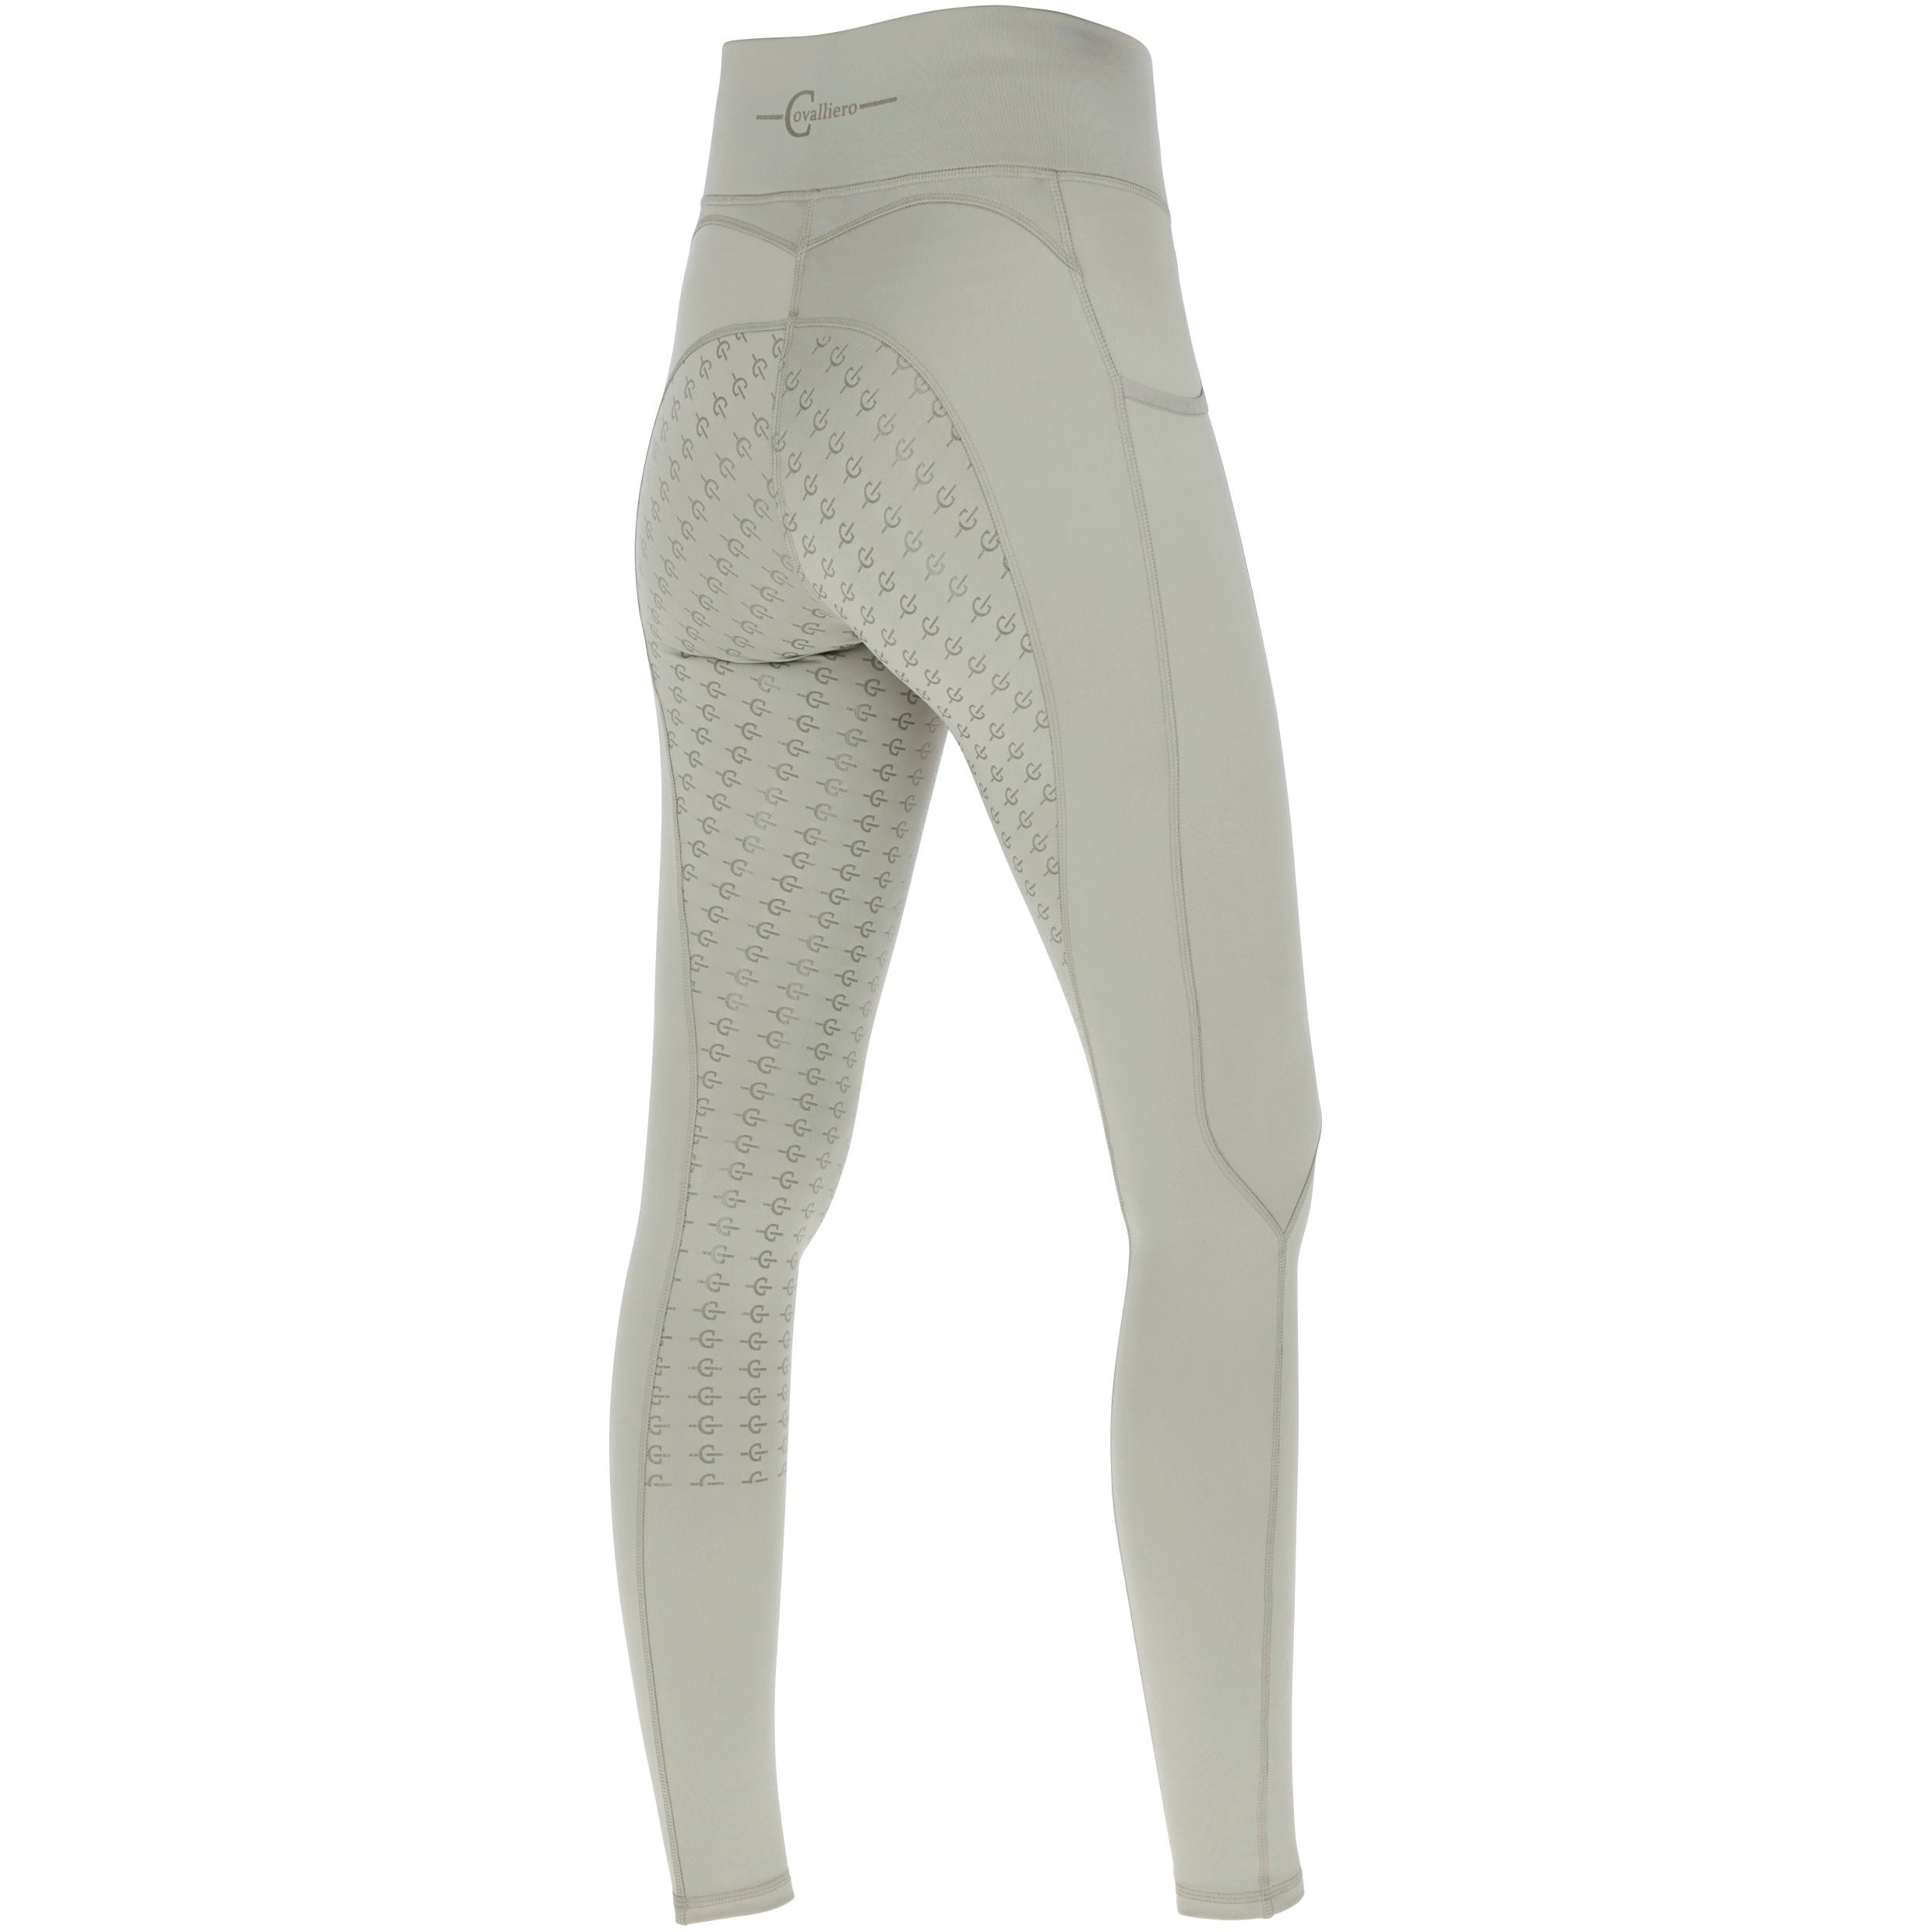 Covalliero Full Seat Riding Tights